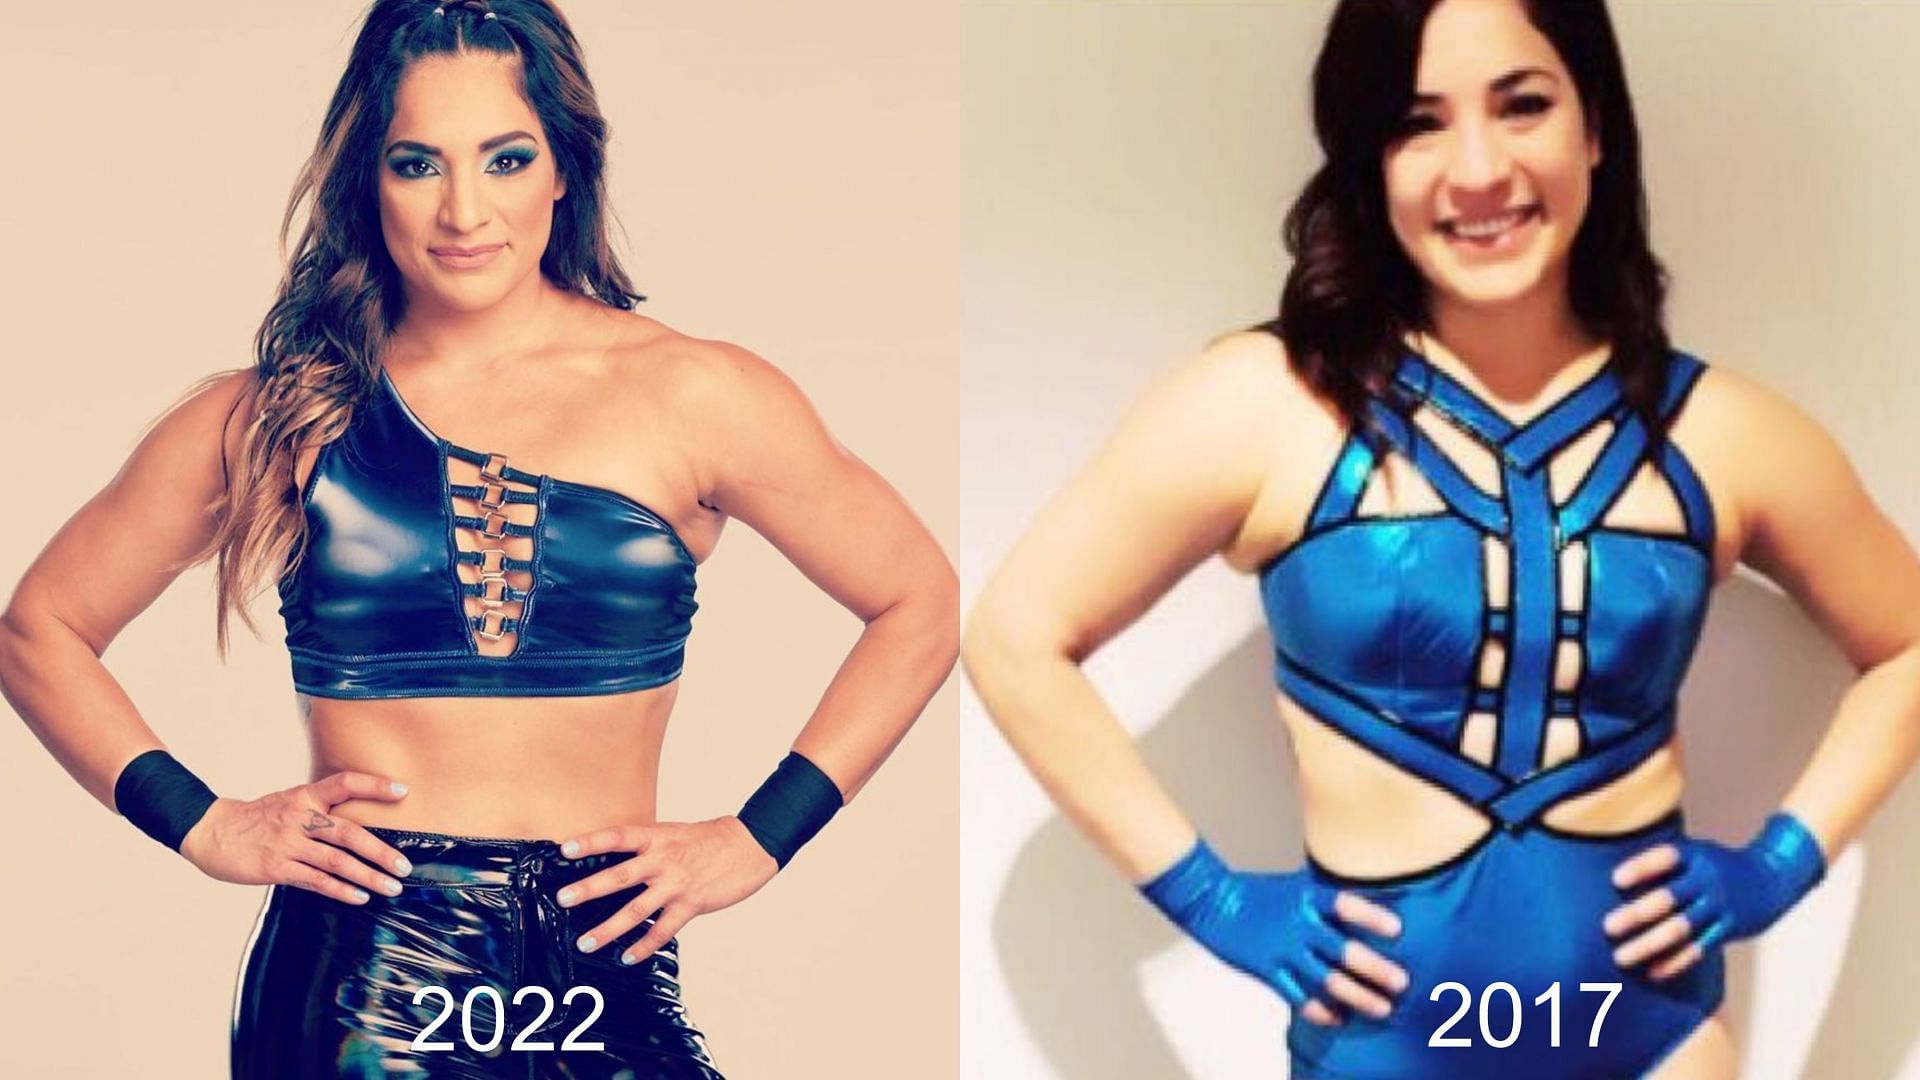 SmackDown star Raquel Rodriguez&#039;s appearances in 2017 and 2022